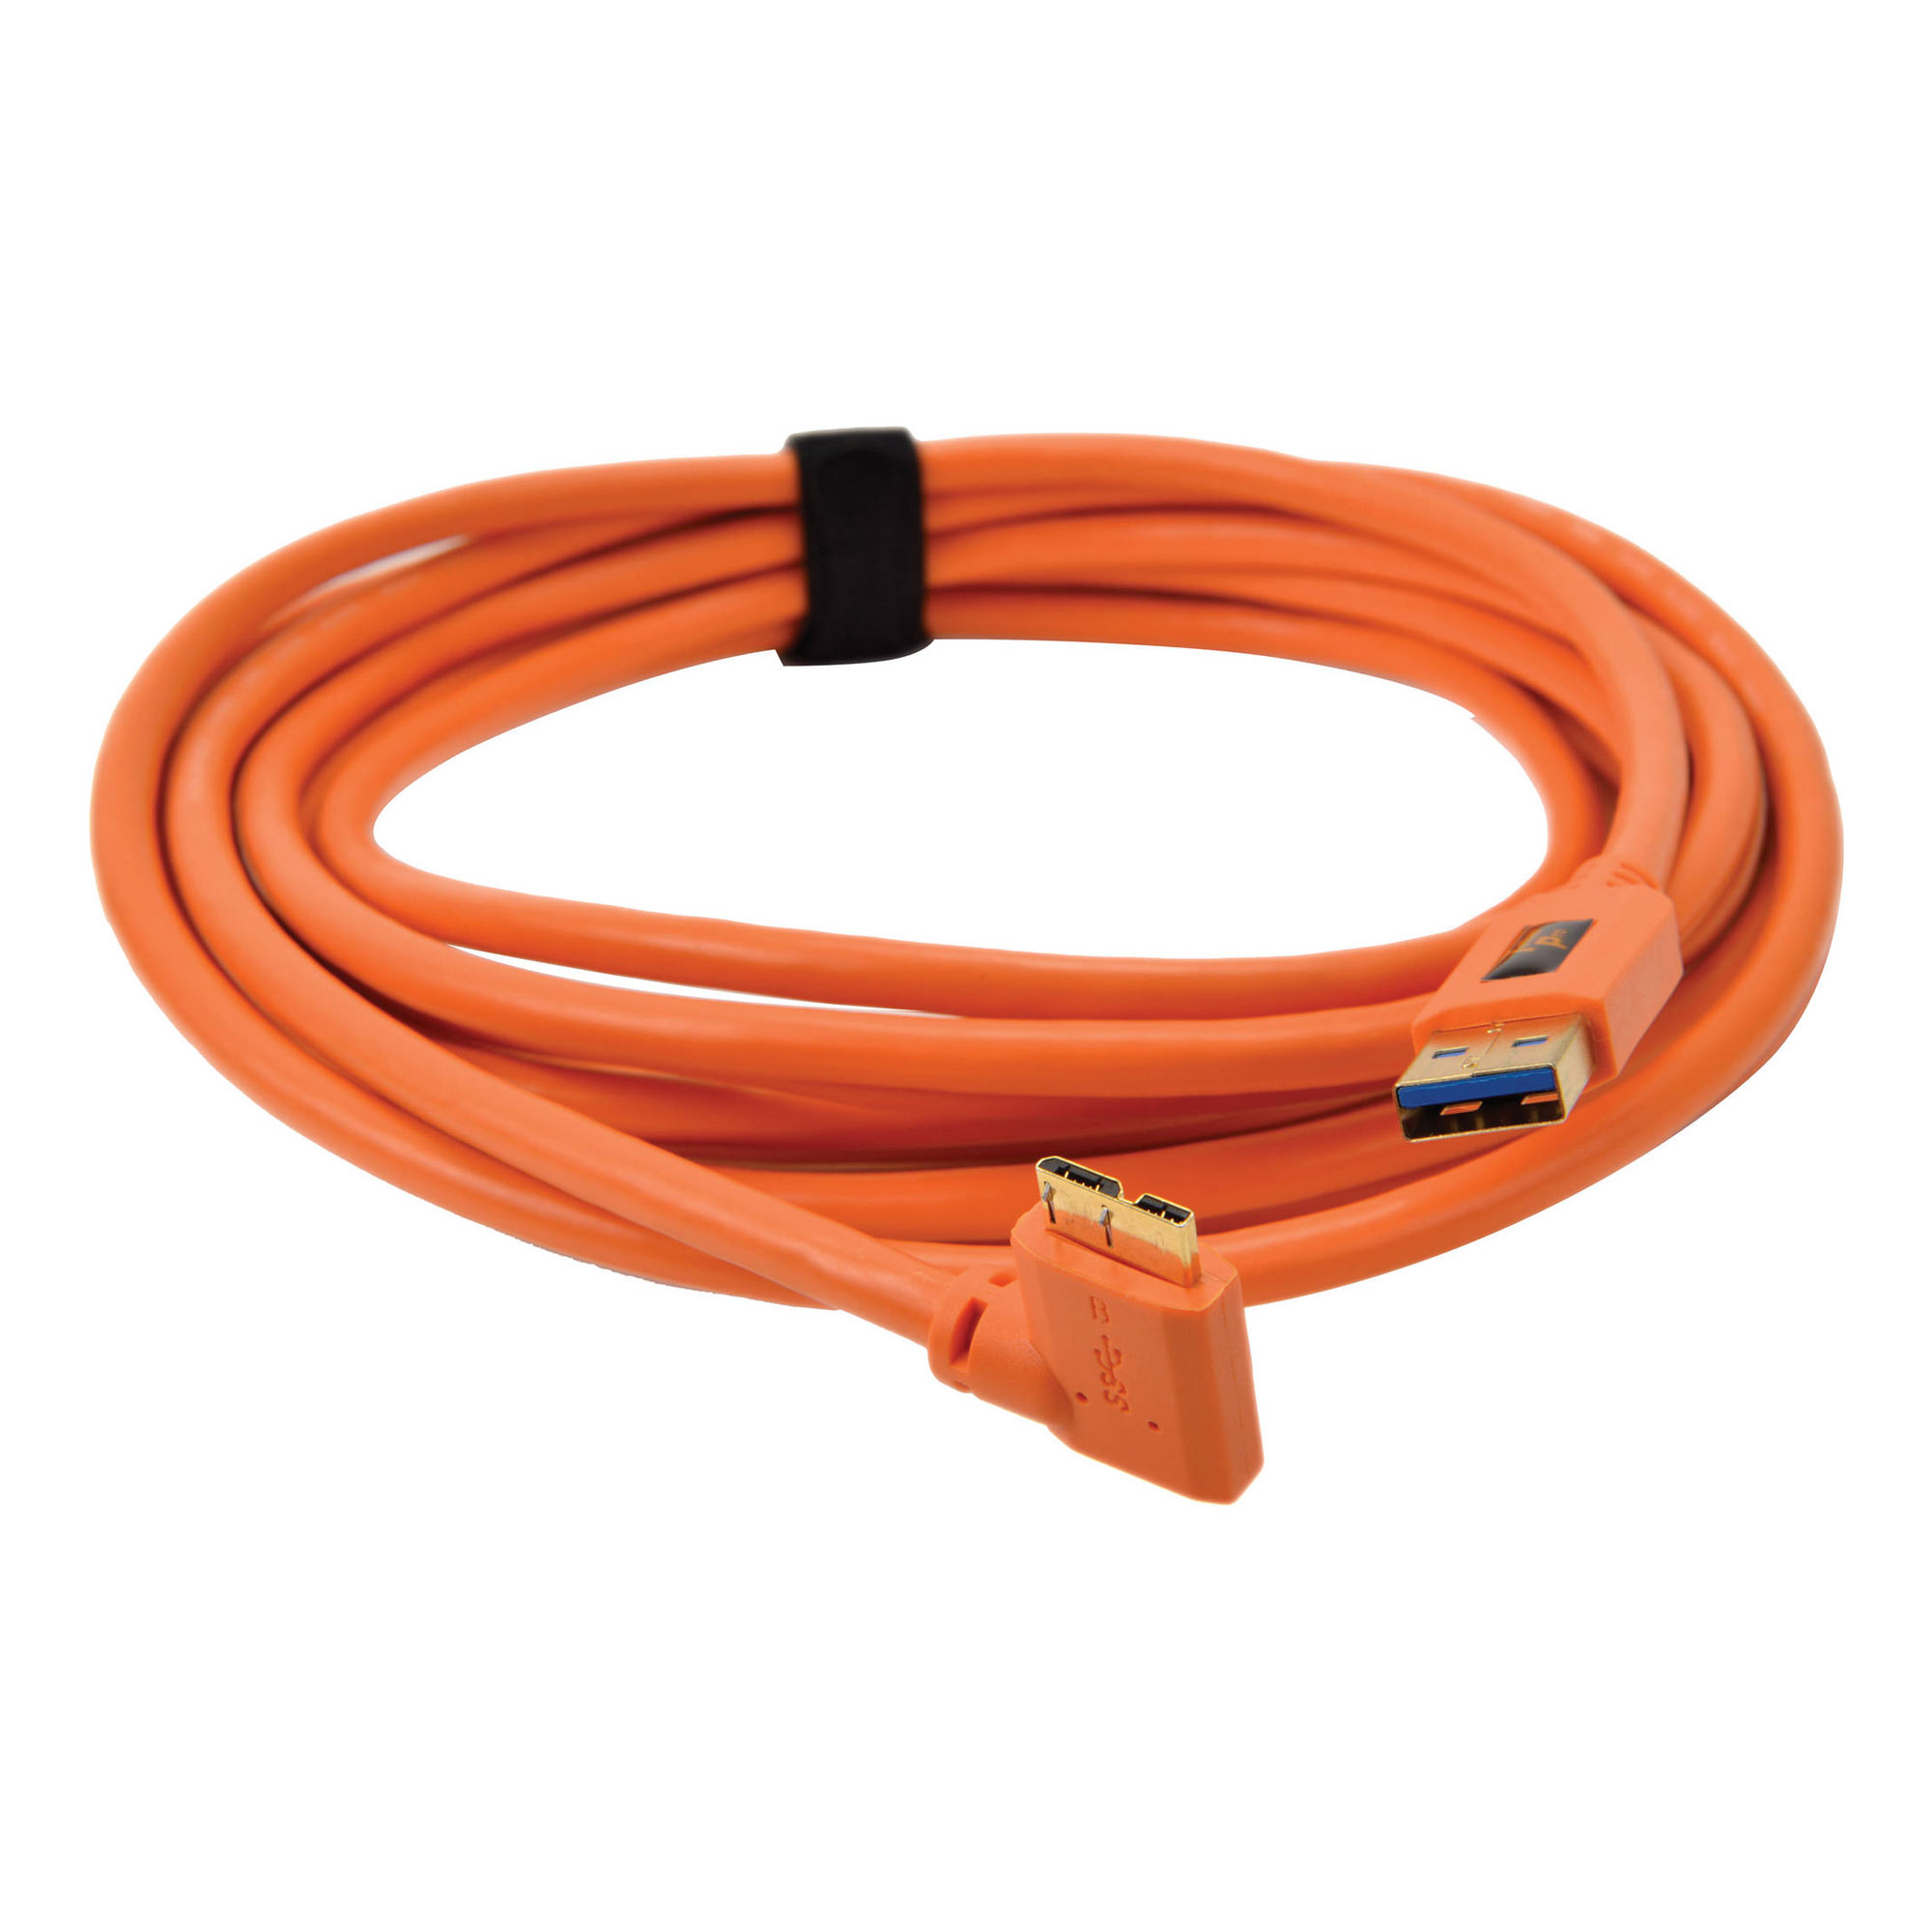 CU61RT15-ORG Tether Tools TetherPro USB 3.0 to Micro-B Right Angle Cable High-Visibility Orange 15' 15 4.6m 4.6m 